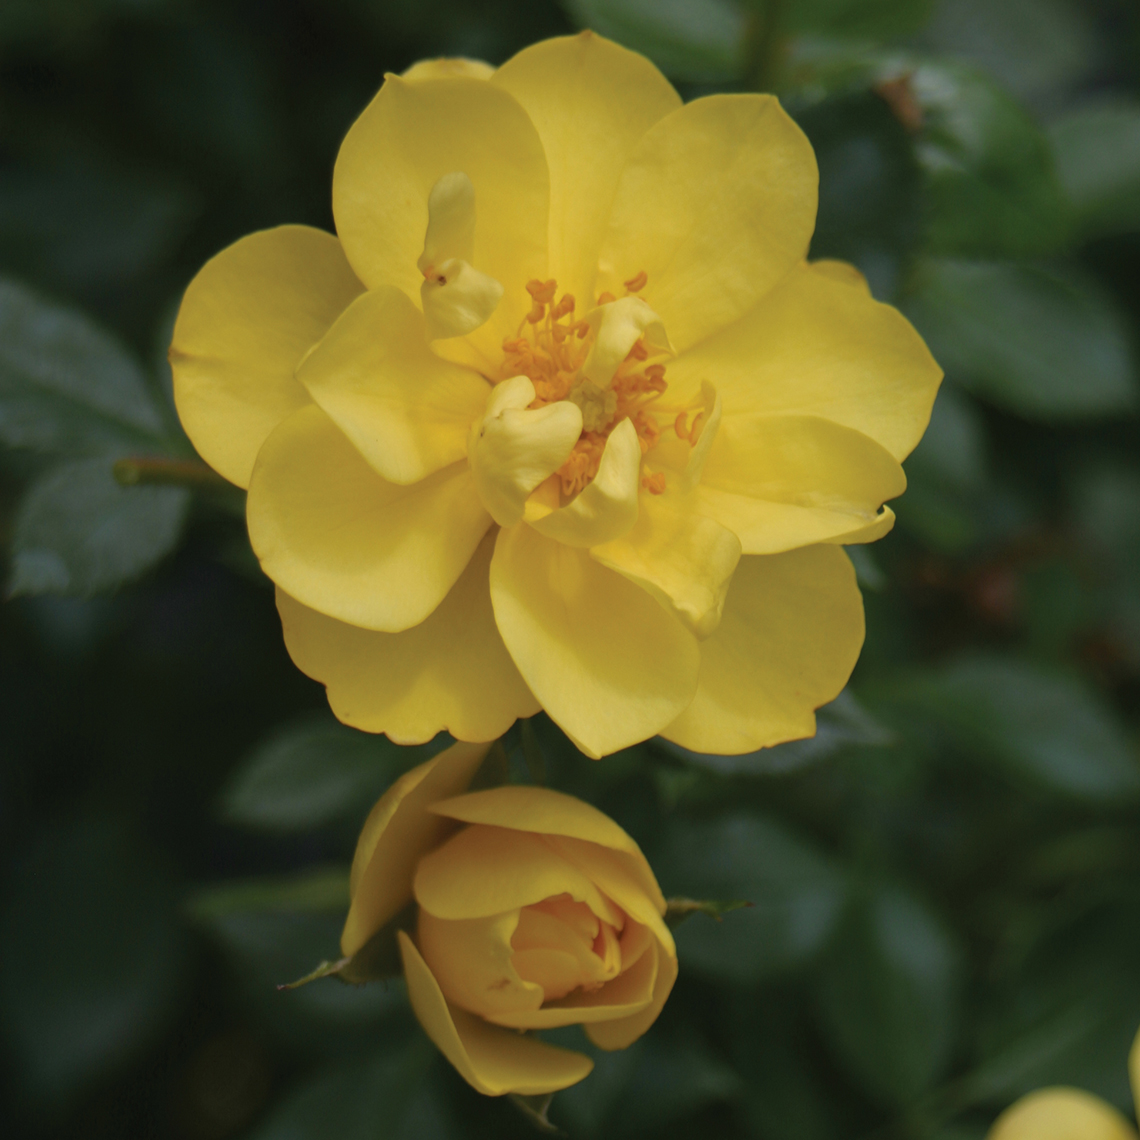 Close up of bright yellow Oso Easy Lemon Zest Rosa flower and bud